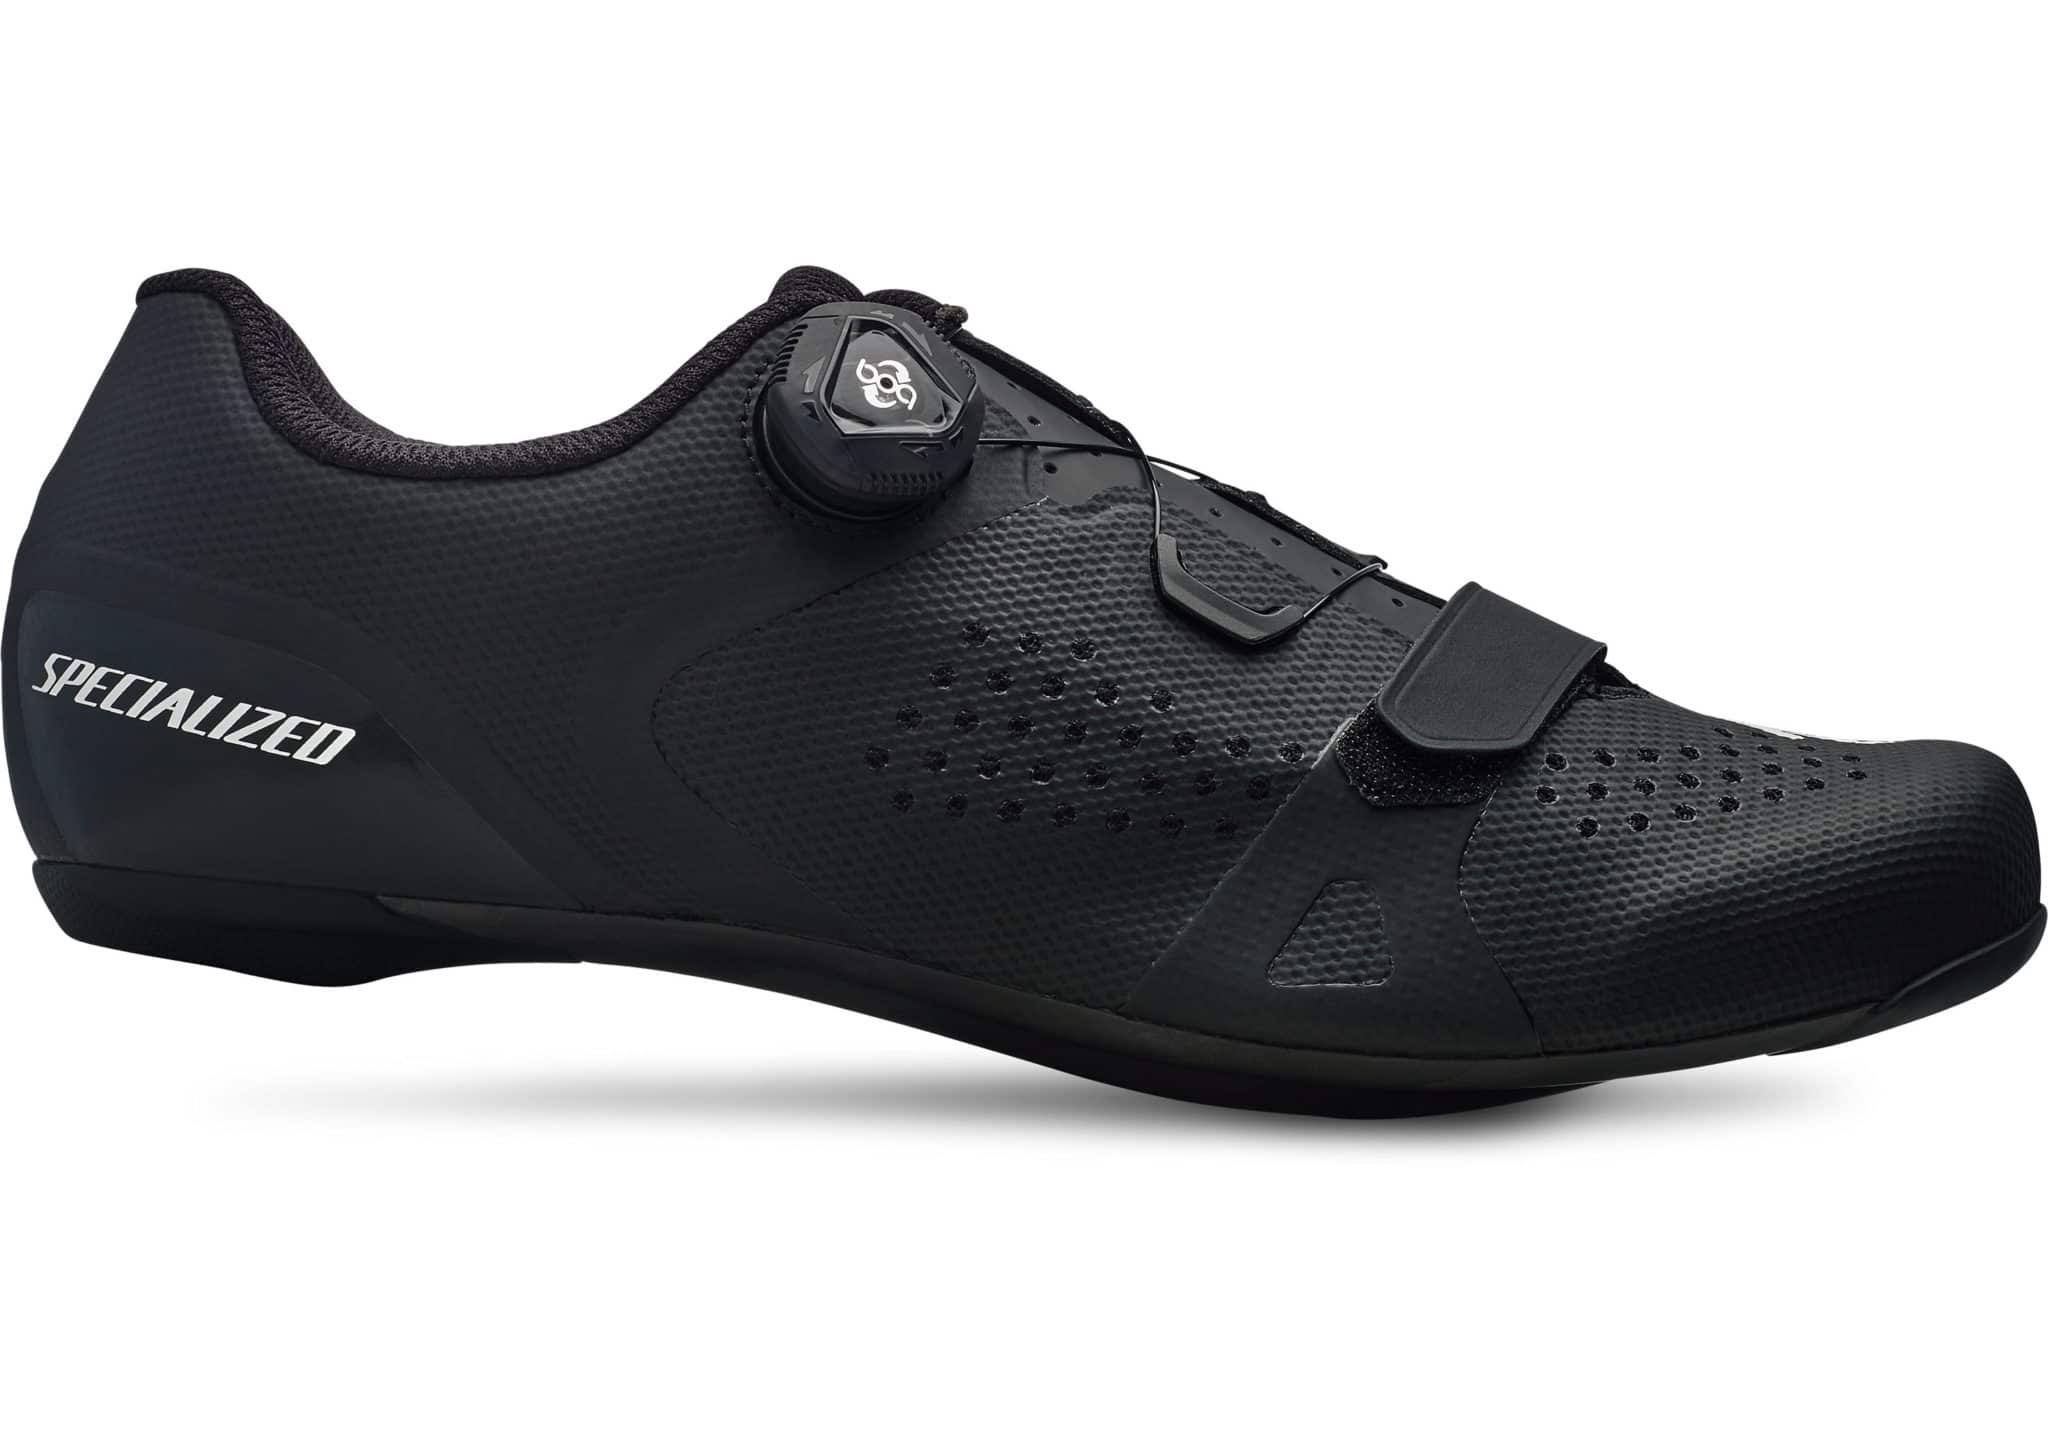 Specialized Torch 2.0 Road Shoes - Black, Size 40